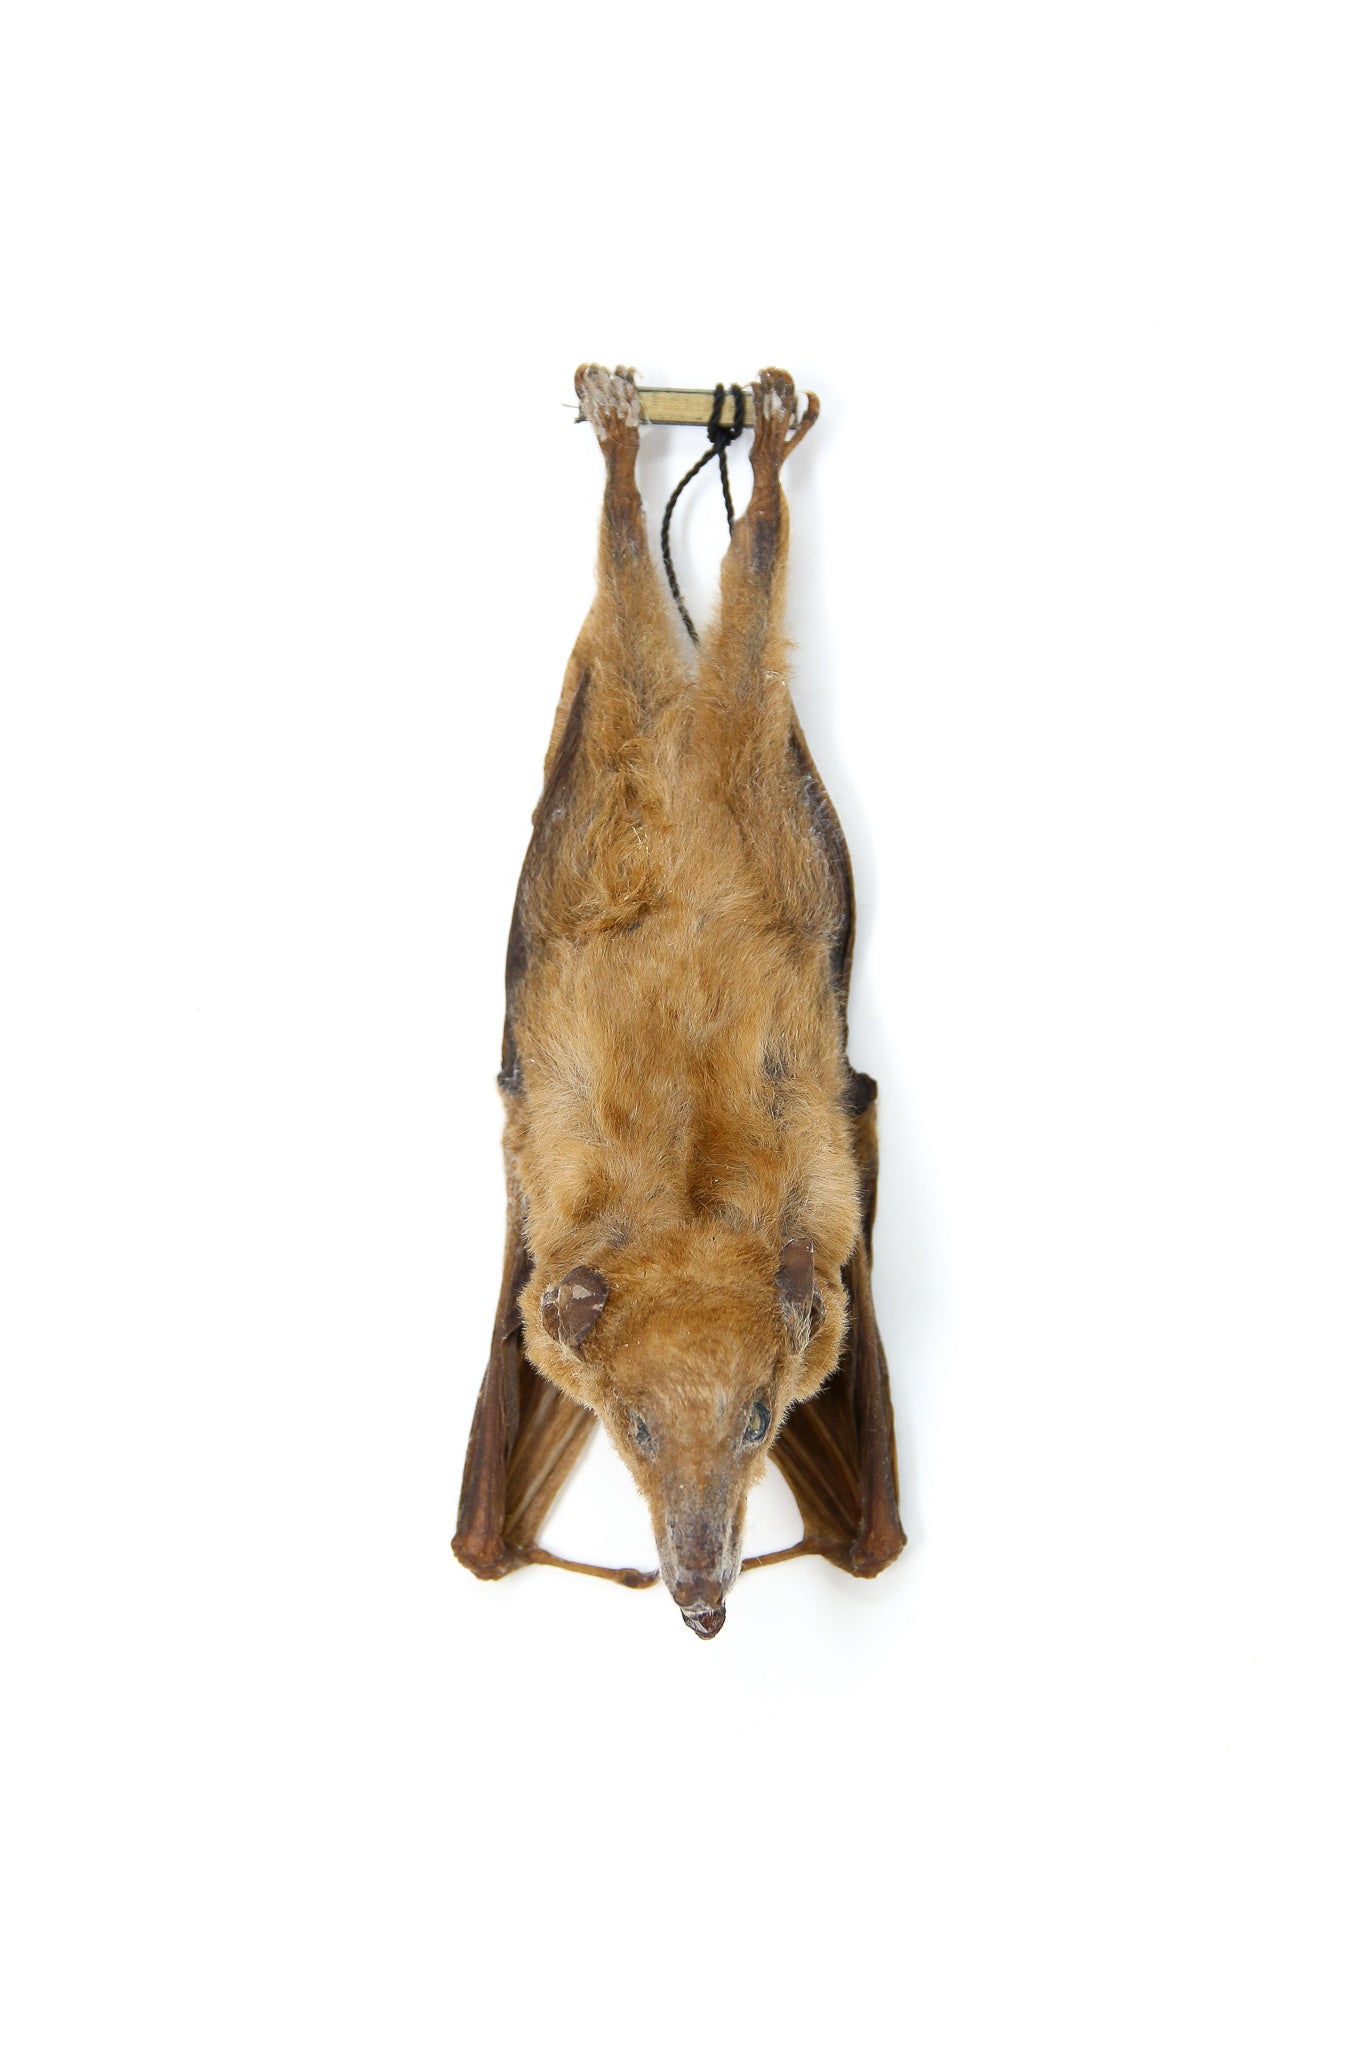 TWO (2) Blossom Fruit Bat (Macroglossus minimus) | A1 Hanging Specimen | Indonesia | Dry-preserved Taxidermy